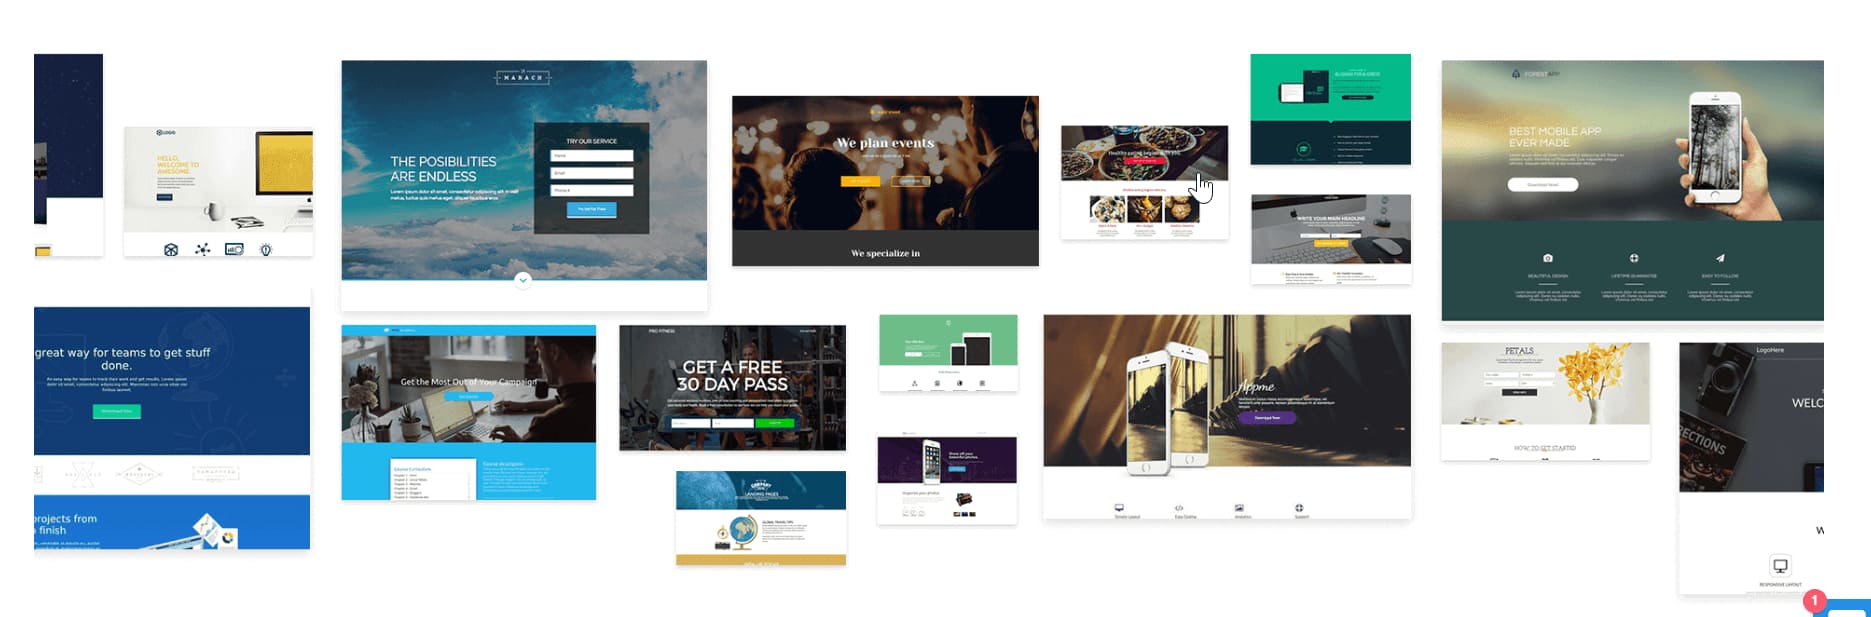 wishpond landing pages